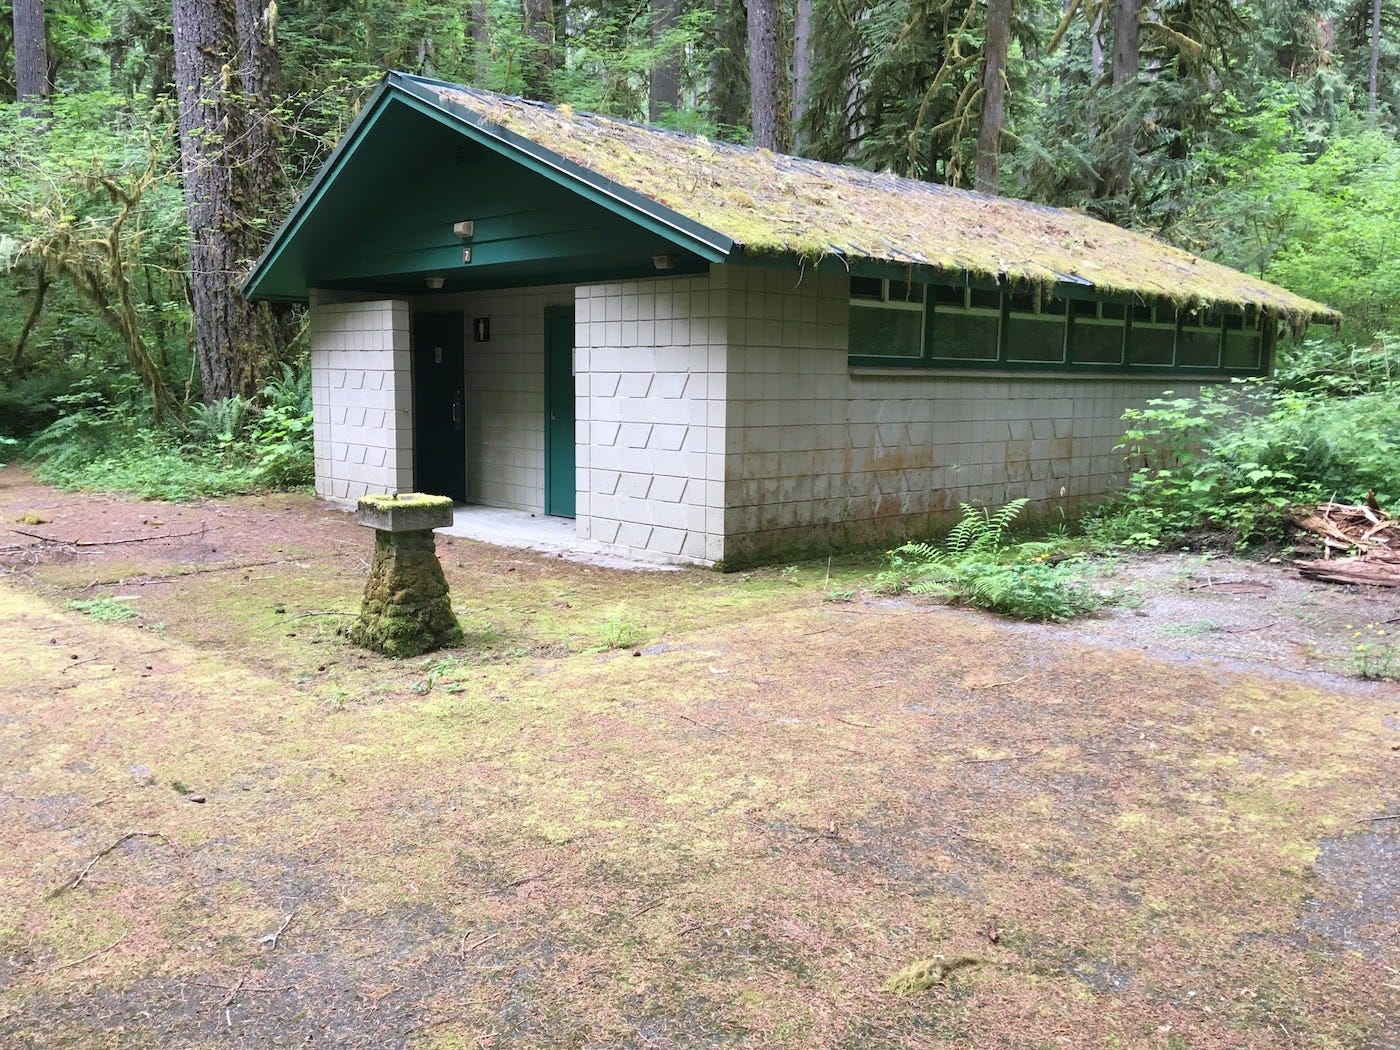 Cinderblock, gabled campground restroom with a forest behind and tree-needle covered pavement in the foreground